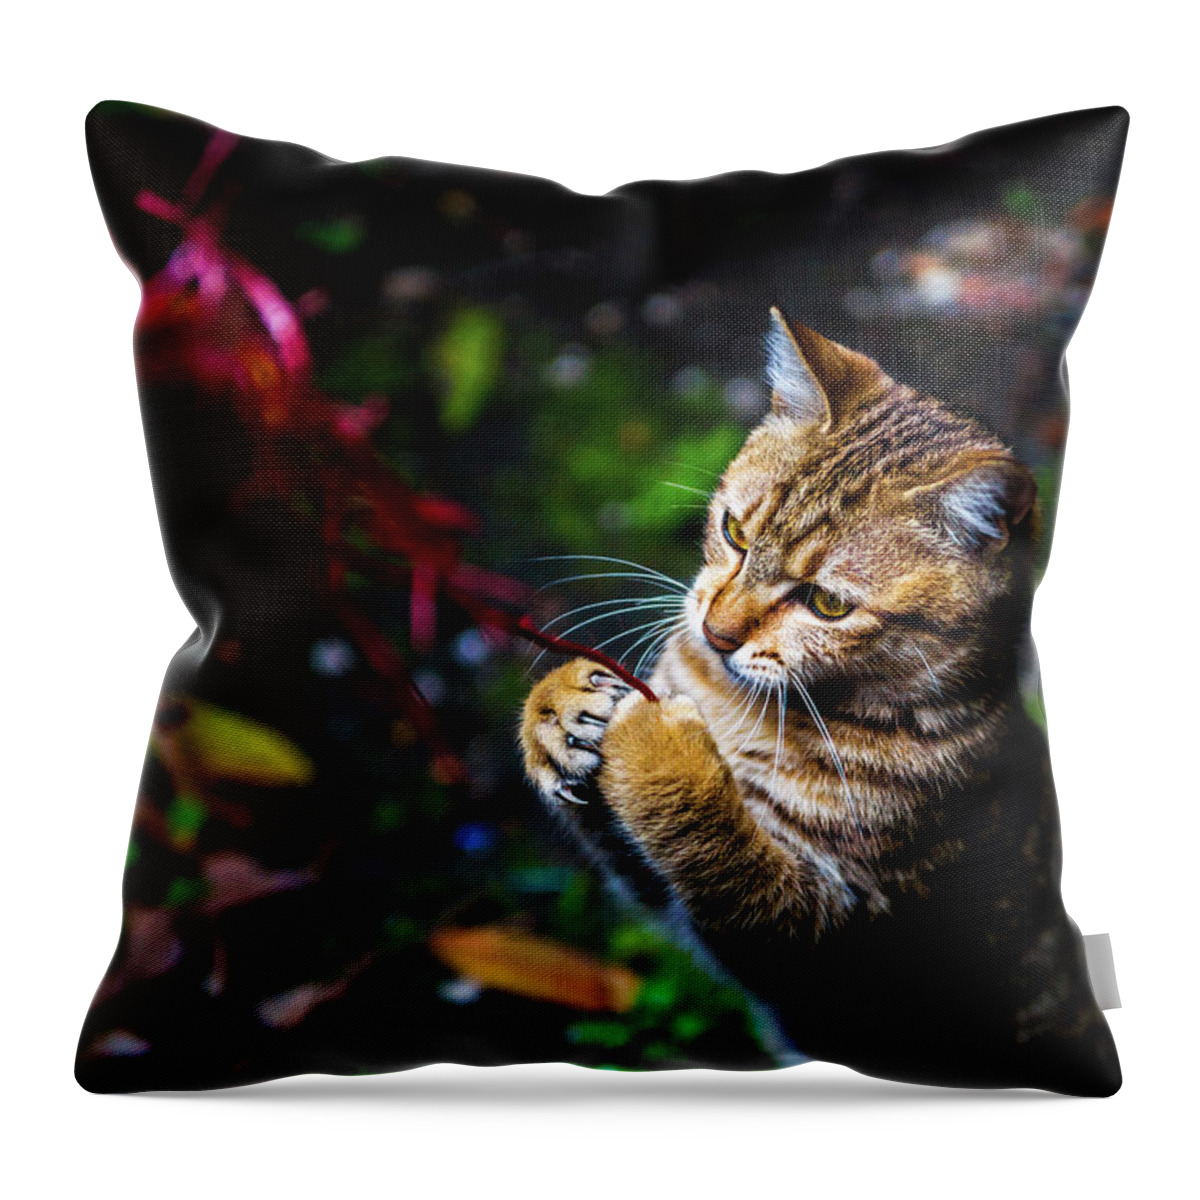 Taiwan Throw Pillow featuring the photograph Catching by Stagnantlife